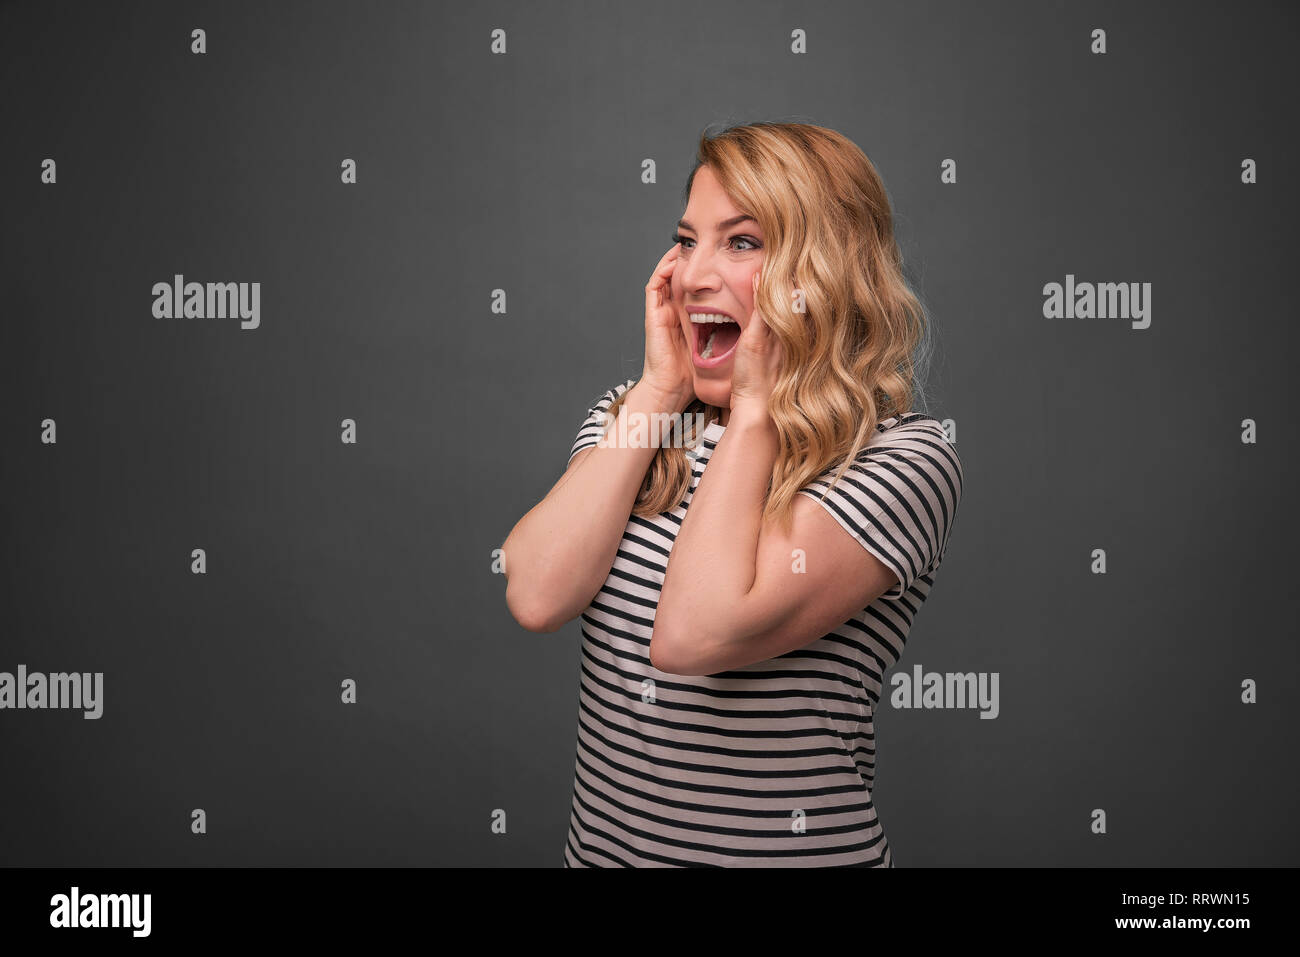 Emotional blonde screams. Frightened woman screaming straining standing on a gray background. Stock Photo